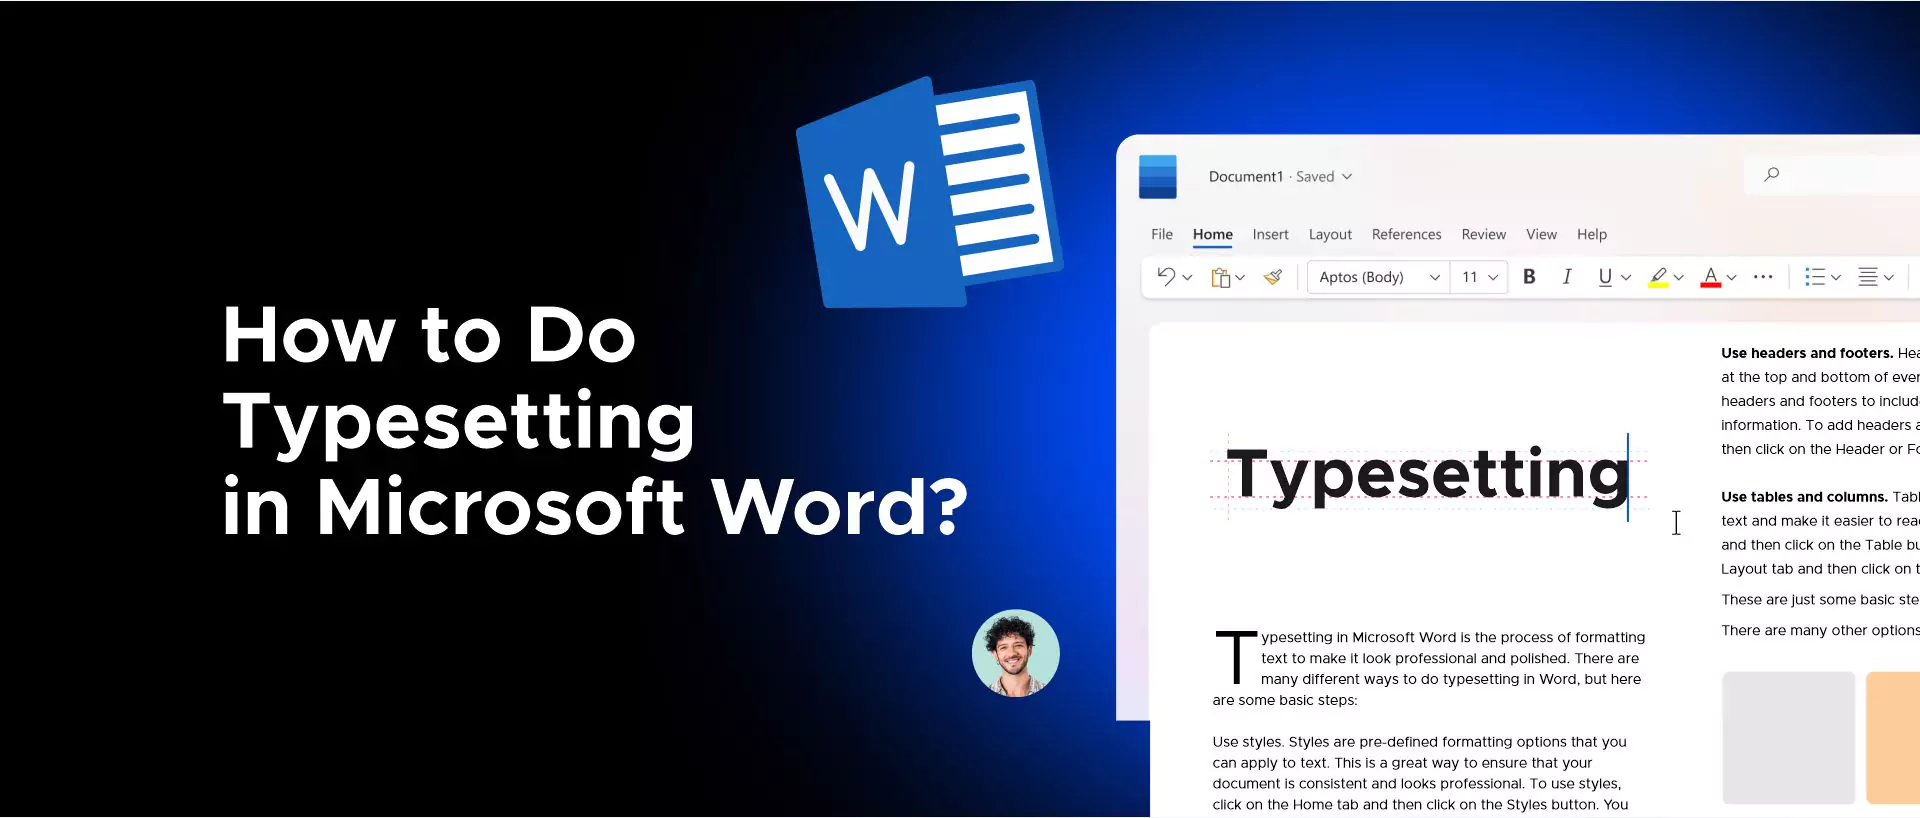 How Do You Typeset a Microsoft Word document?